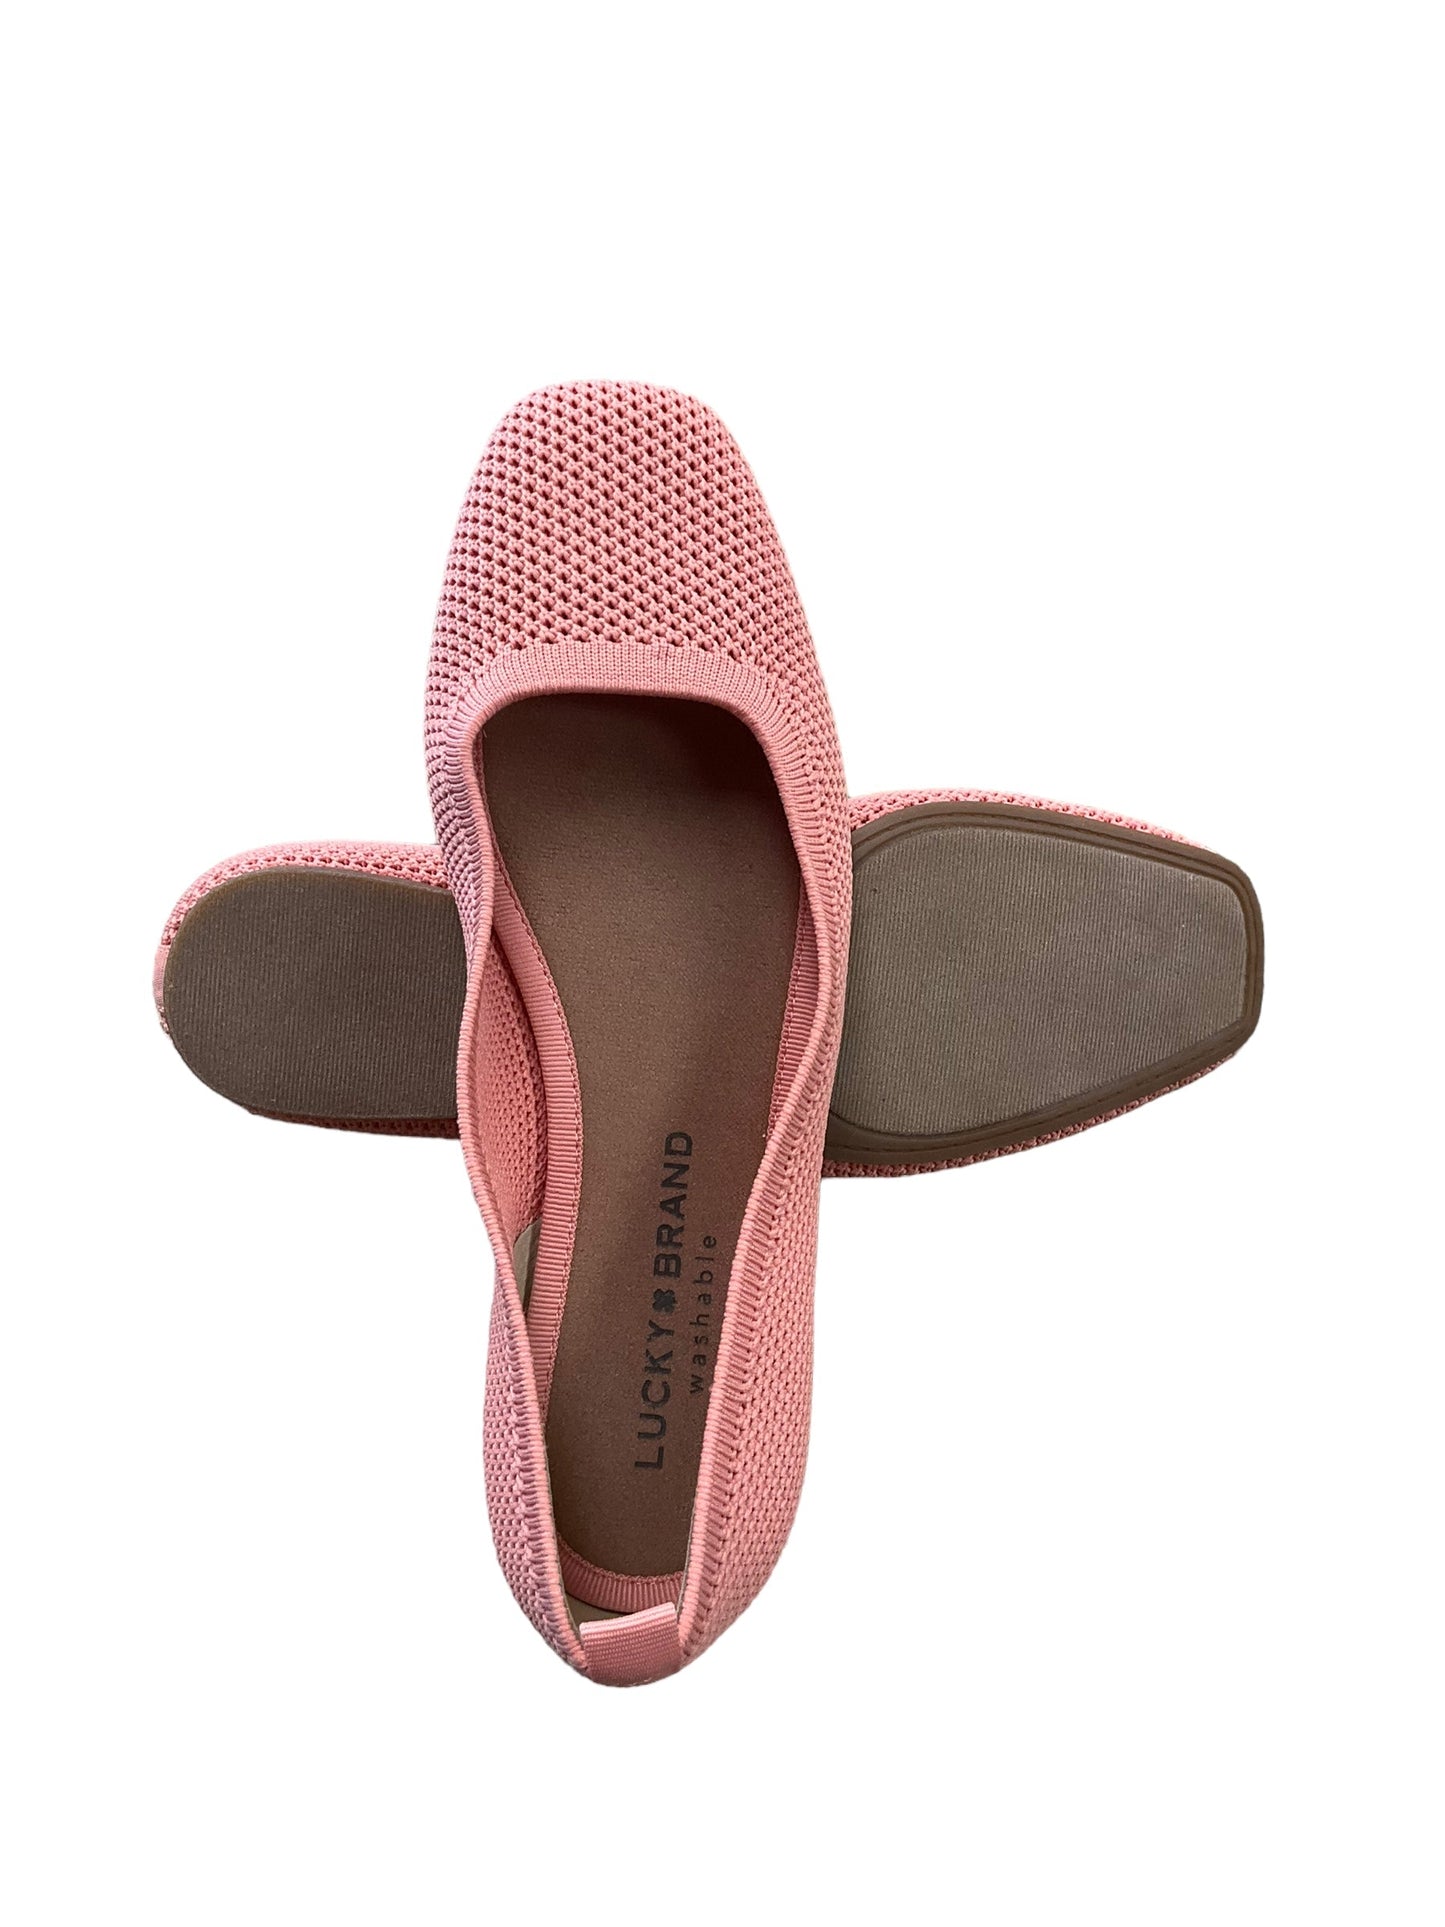 Coral Shoes Flats Lucky Brand, Size 7